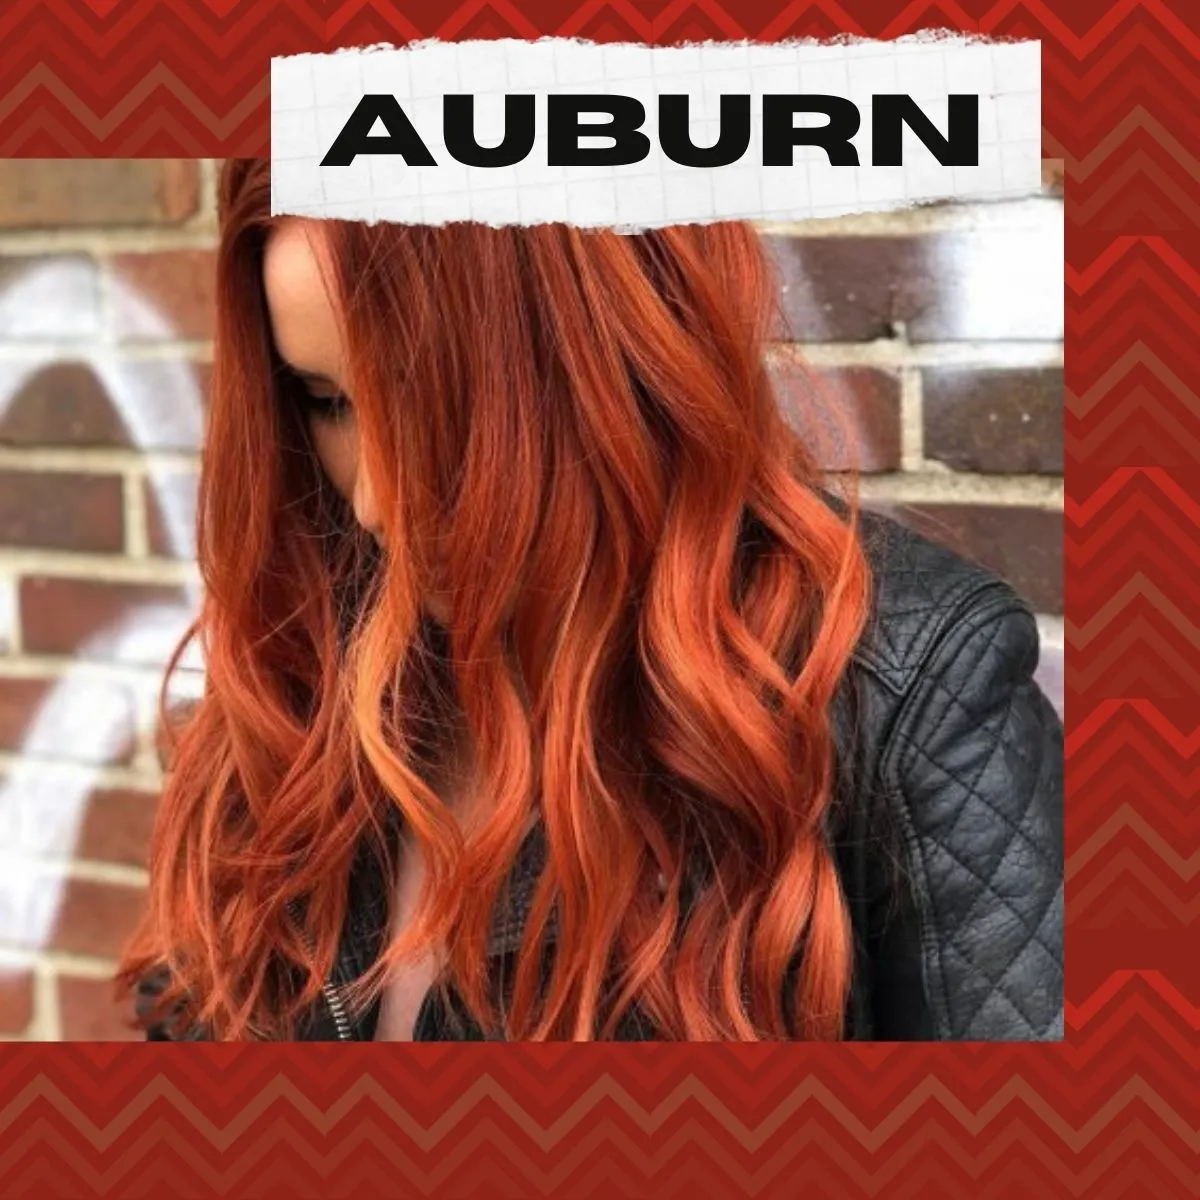 55 Red Hair Color Ideas To Try For Every Skin Tone | Hair.com By L'Oréal